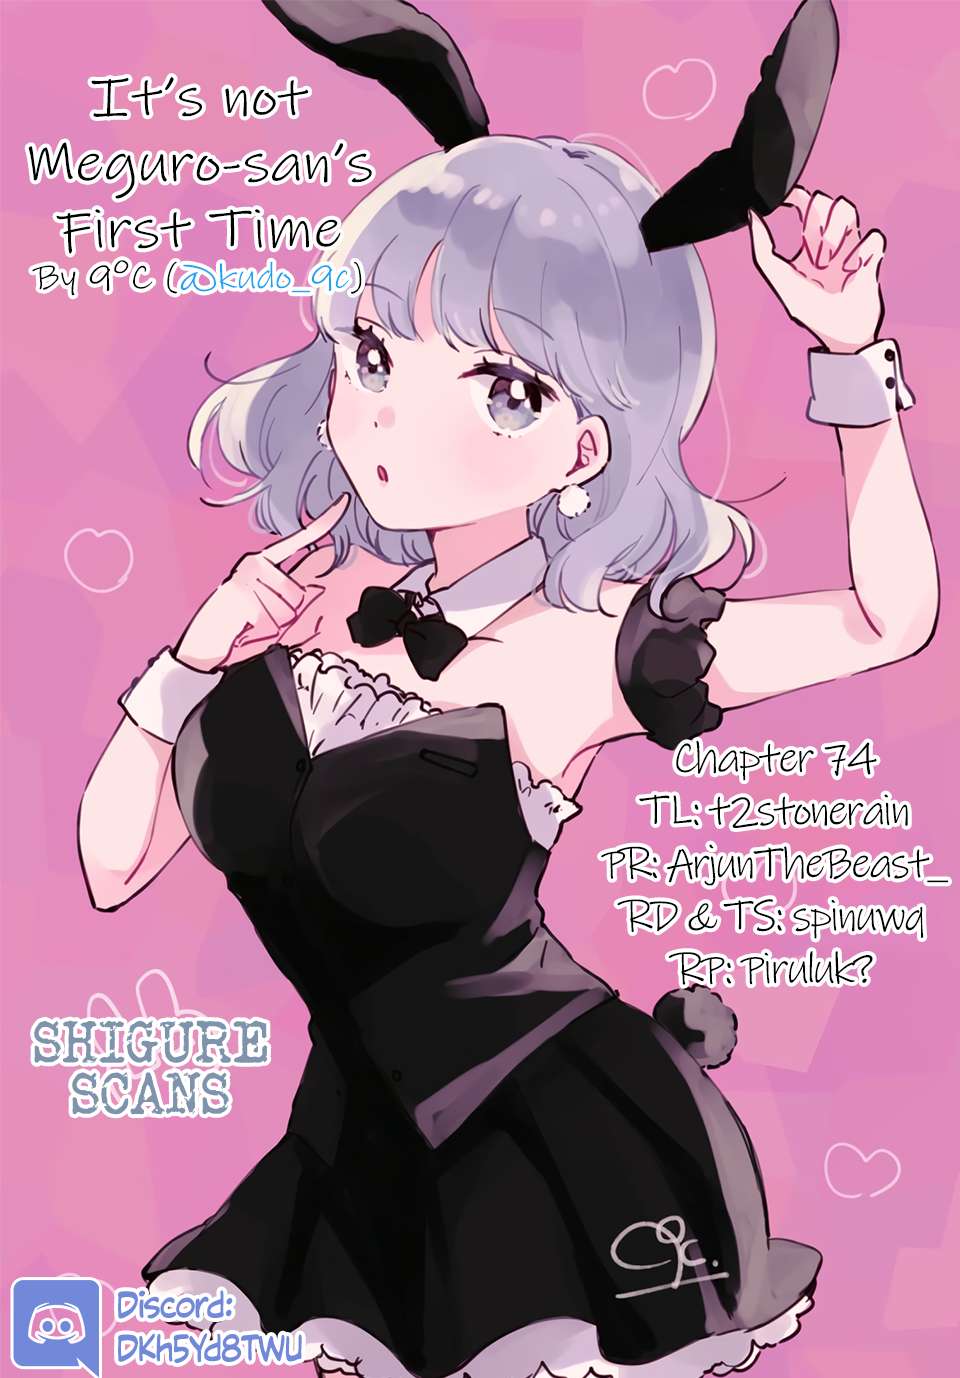 It's Not Meguro-san's First Time - chapter 74 - #1